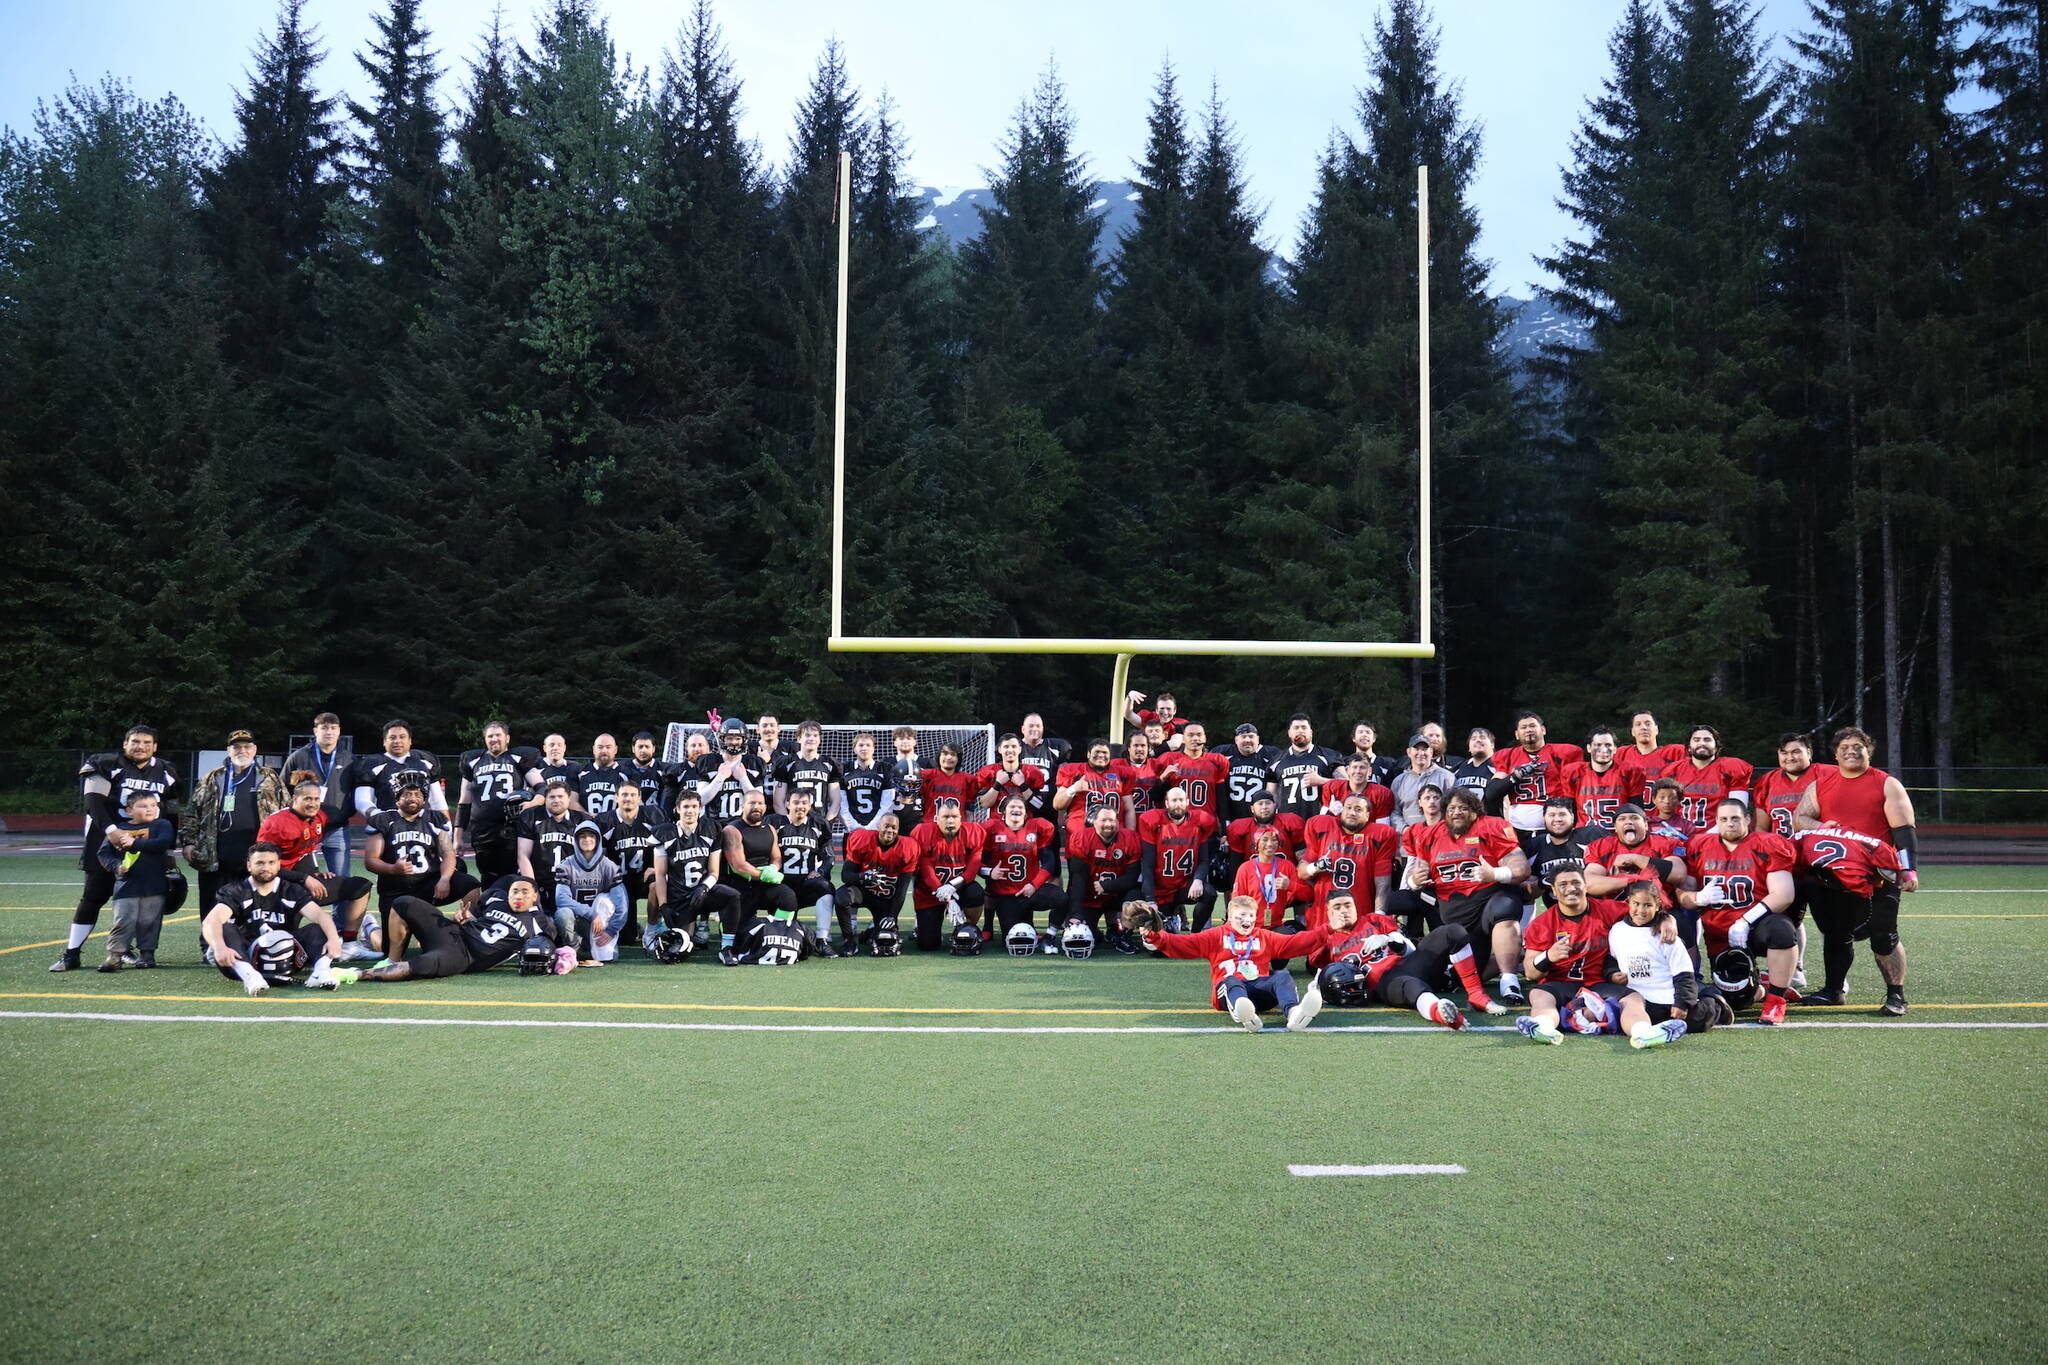 Team World and Team Juneau join together for a photo after the Juneau Alumni Football game Friday evening at Adair-Kennedy Field. (Clarise Larson / Juneau Empire)